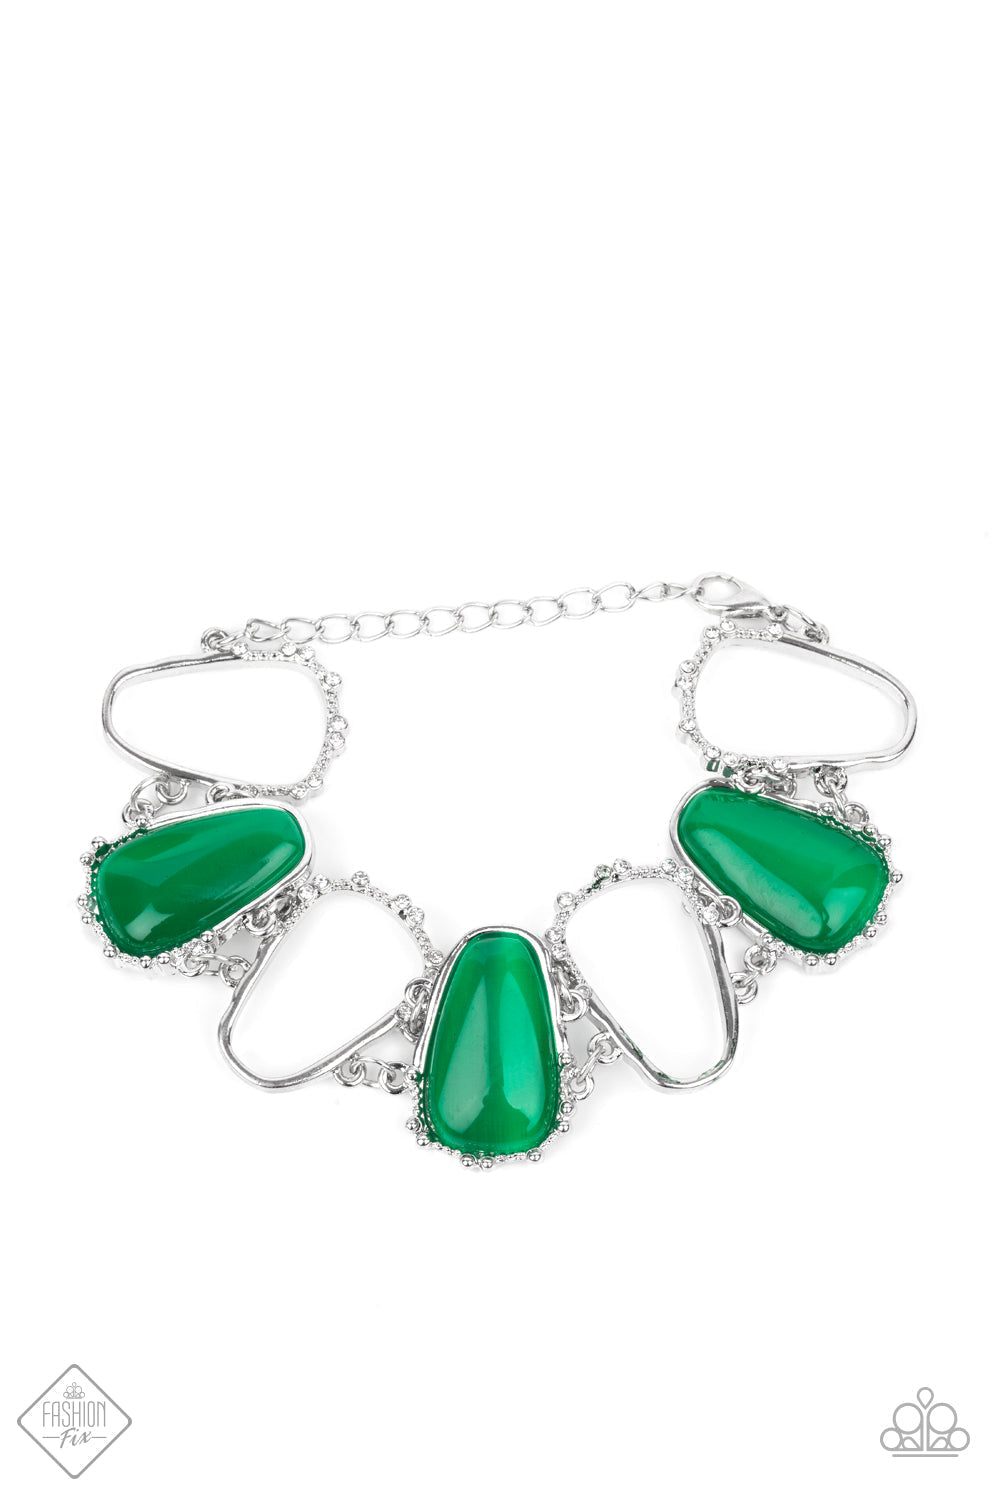 Yacht Club Couture - Green and Silver Bracelet - Paparazzi Accessories - Encased in studded silver frames, a tranquil collection of asymmetrical mint cat’s eye stone teardrops and airy silver frames delicately link around the wrist for an ethereally sparkly display. A sprinkling of rhinestones accent the open frames, adding a touch of elegance to the piece. Features an adjustable clasp closure.